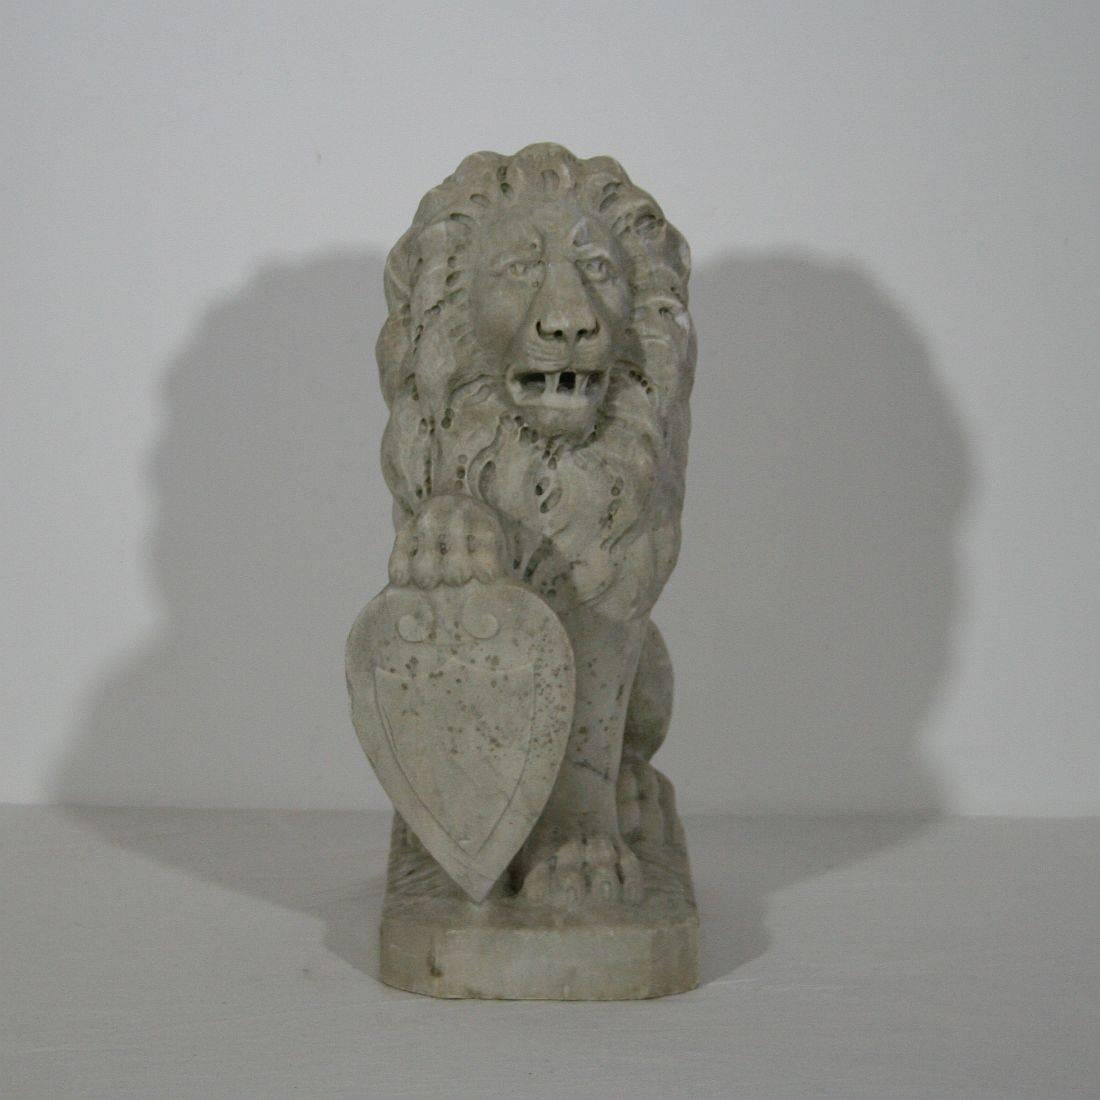 Unique 18th century hand-carved marble lion with a stunning weathered look.
Italy, circa 1750-1800
Weathered, small losses. More pictures available on request.